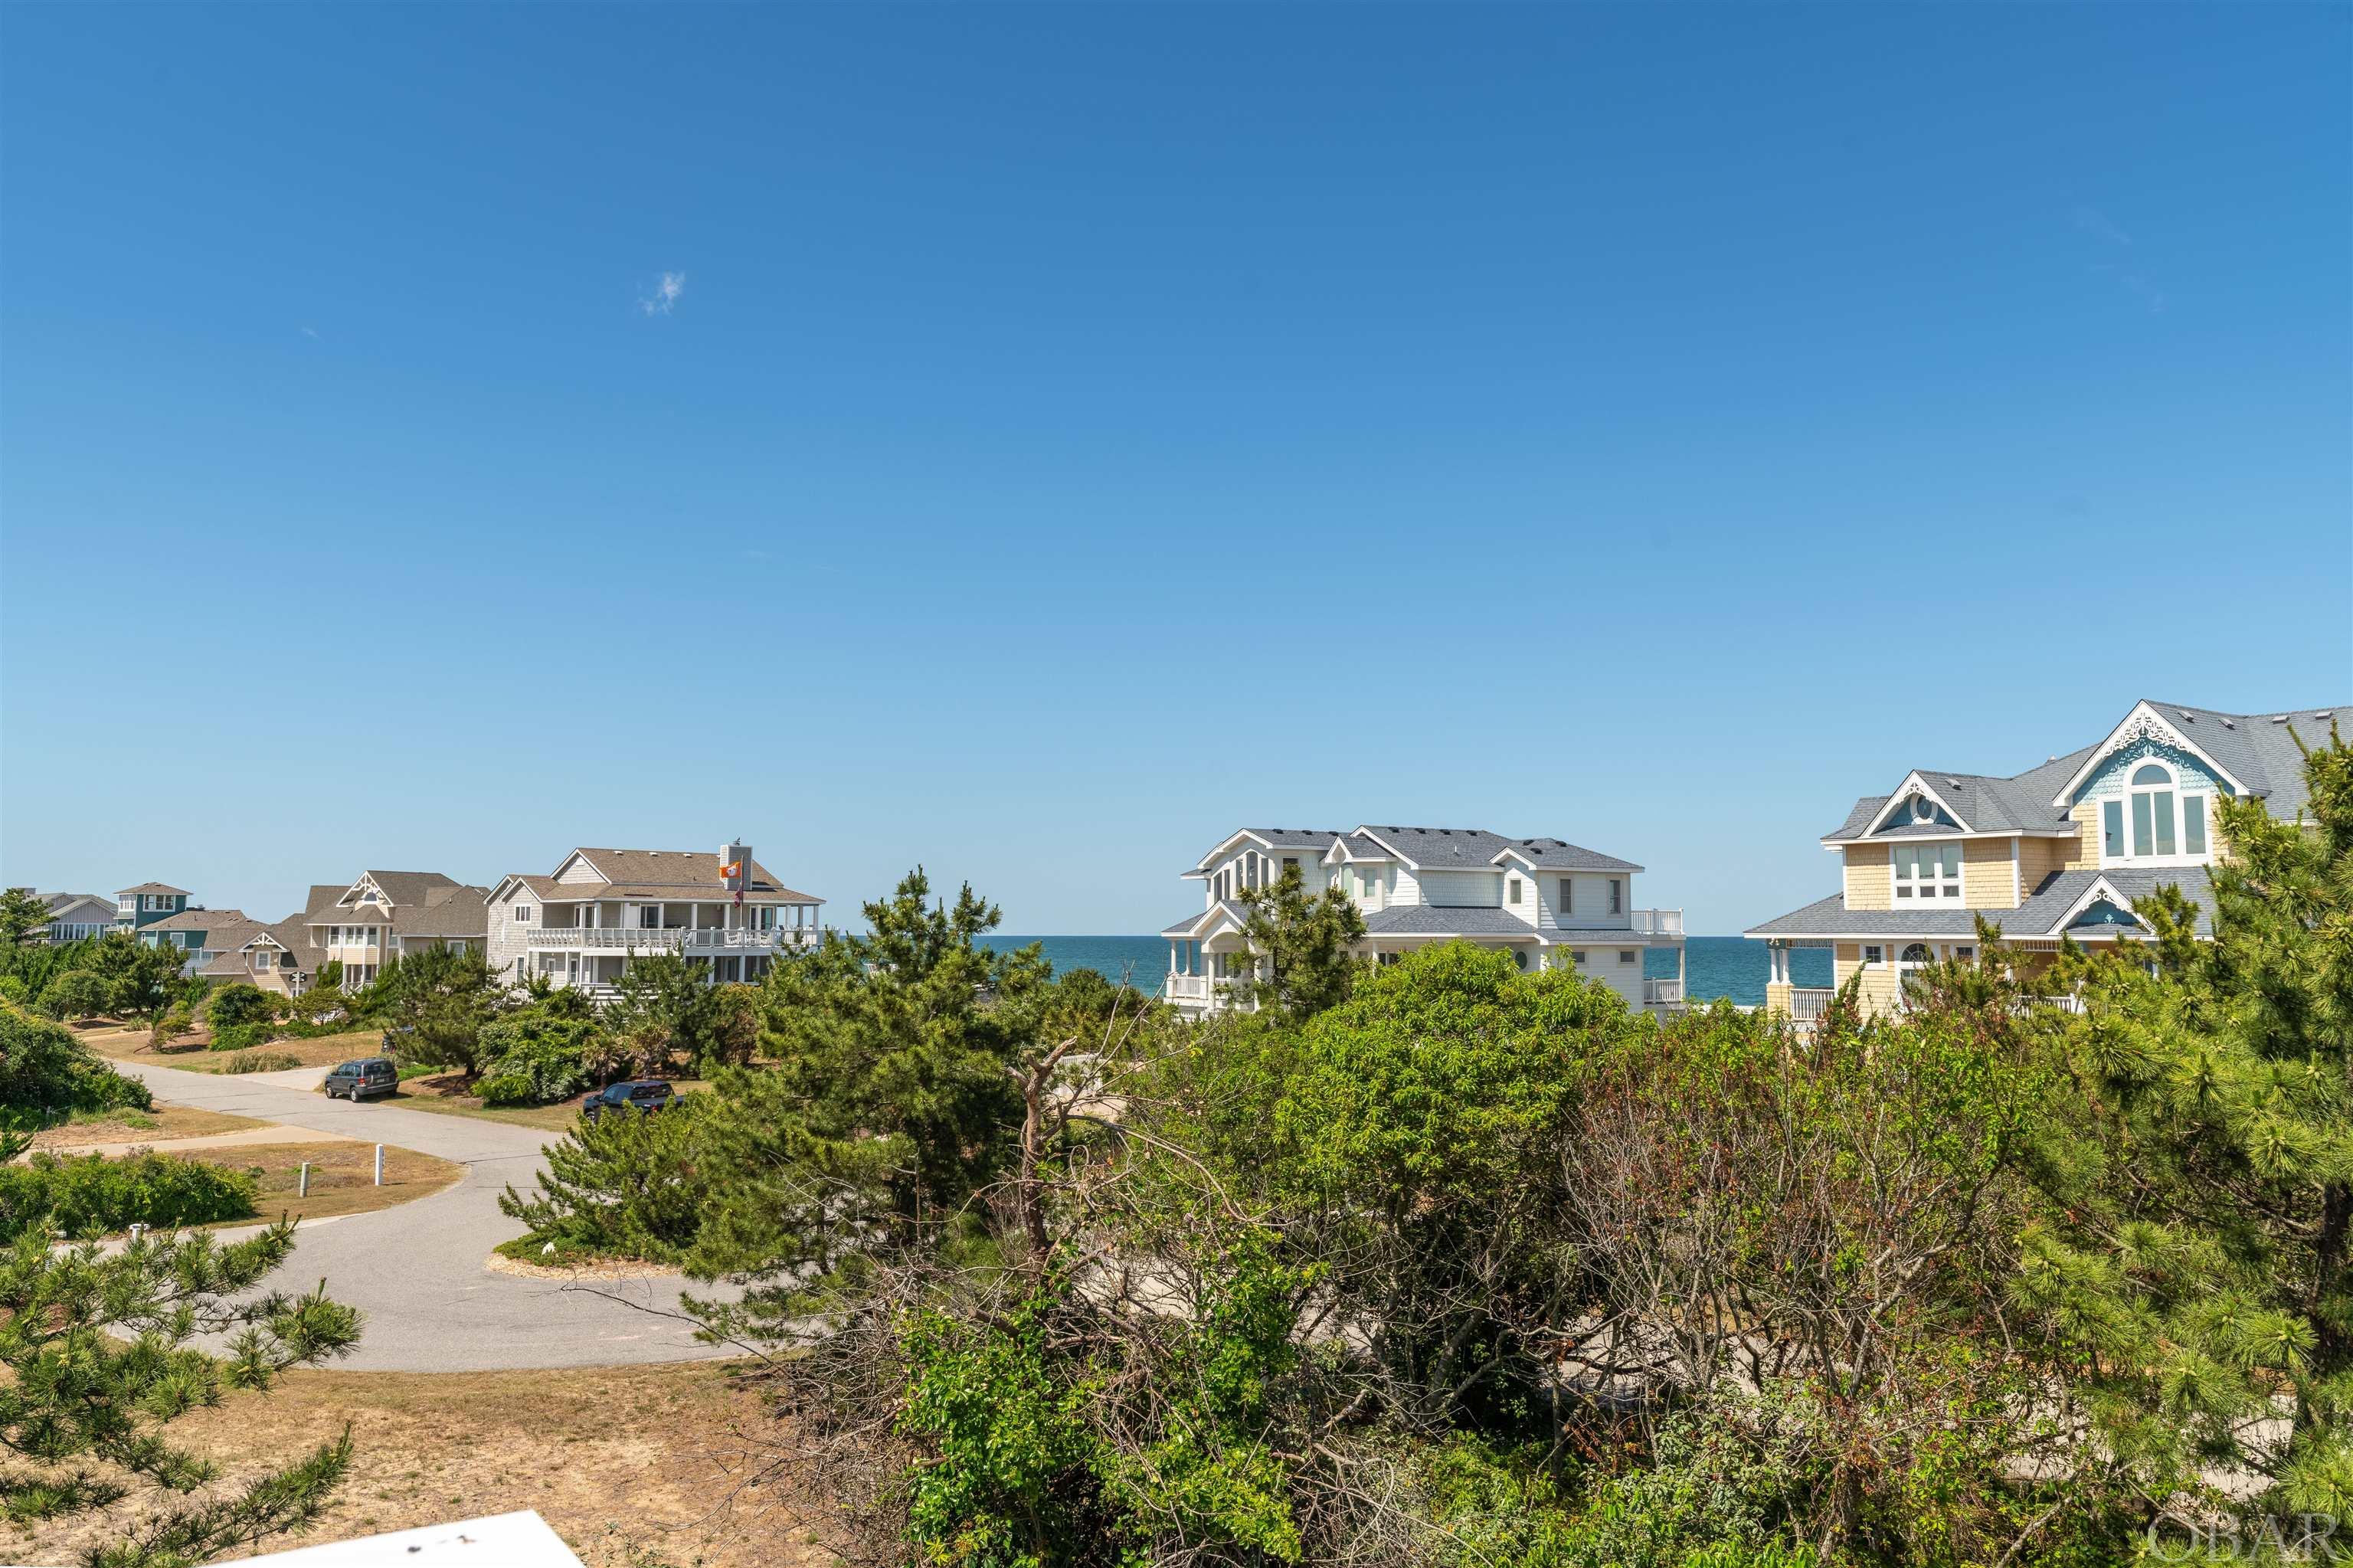 472 Land Fall Court, Corolla, NC 27927, 8 Bedrooms Bedrooms, ,6 BathroomsBathrooms,Residential,For Sale,Land Fall Court,120392